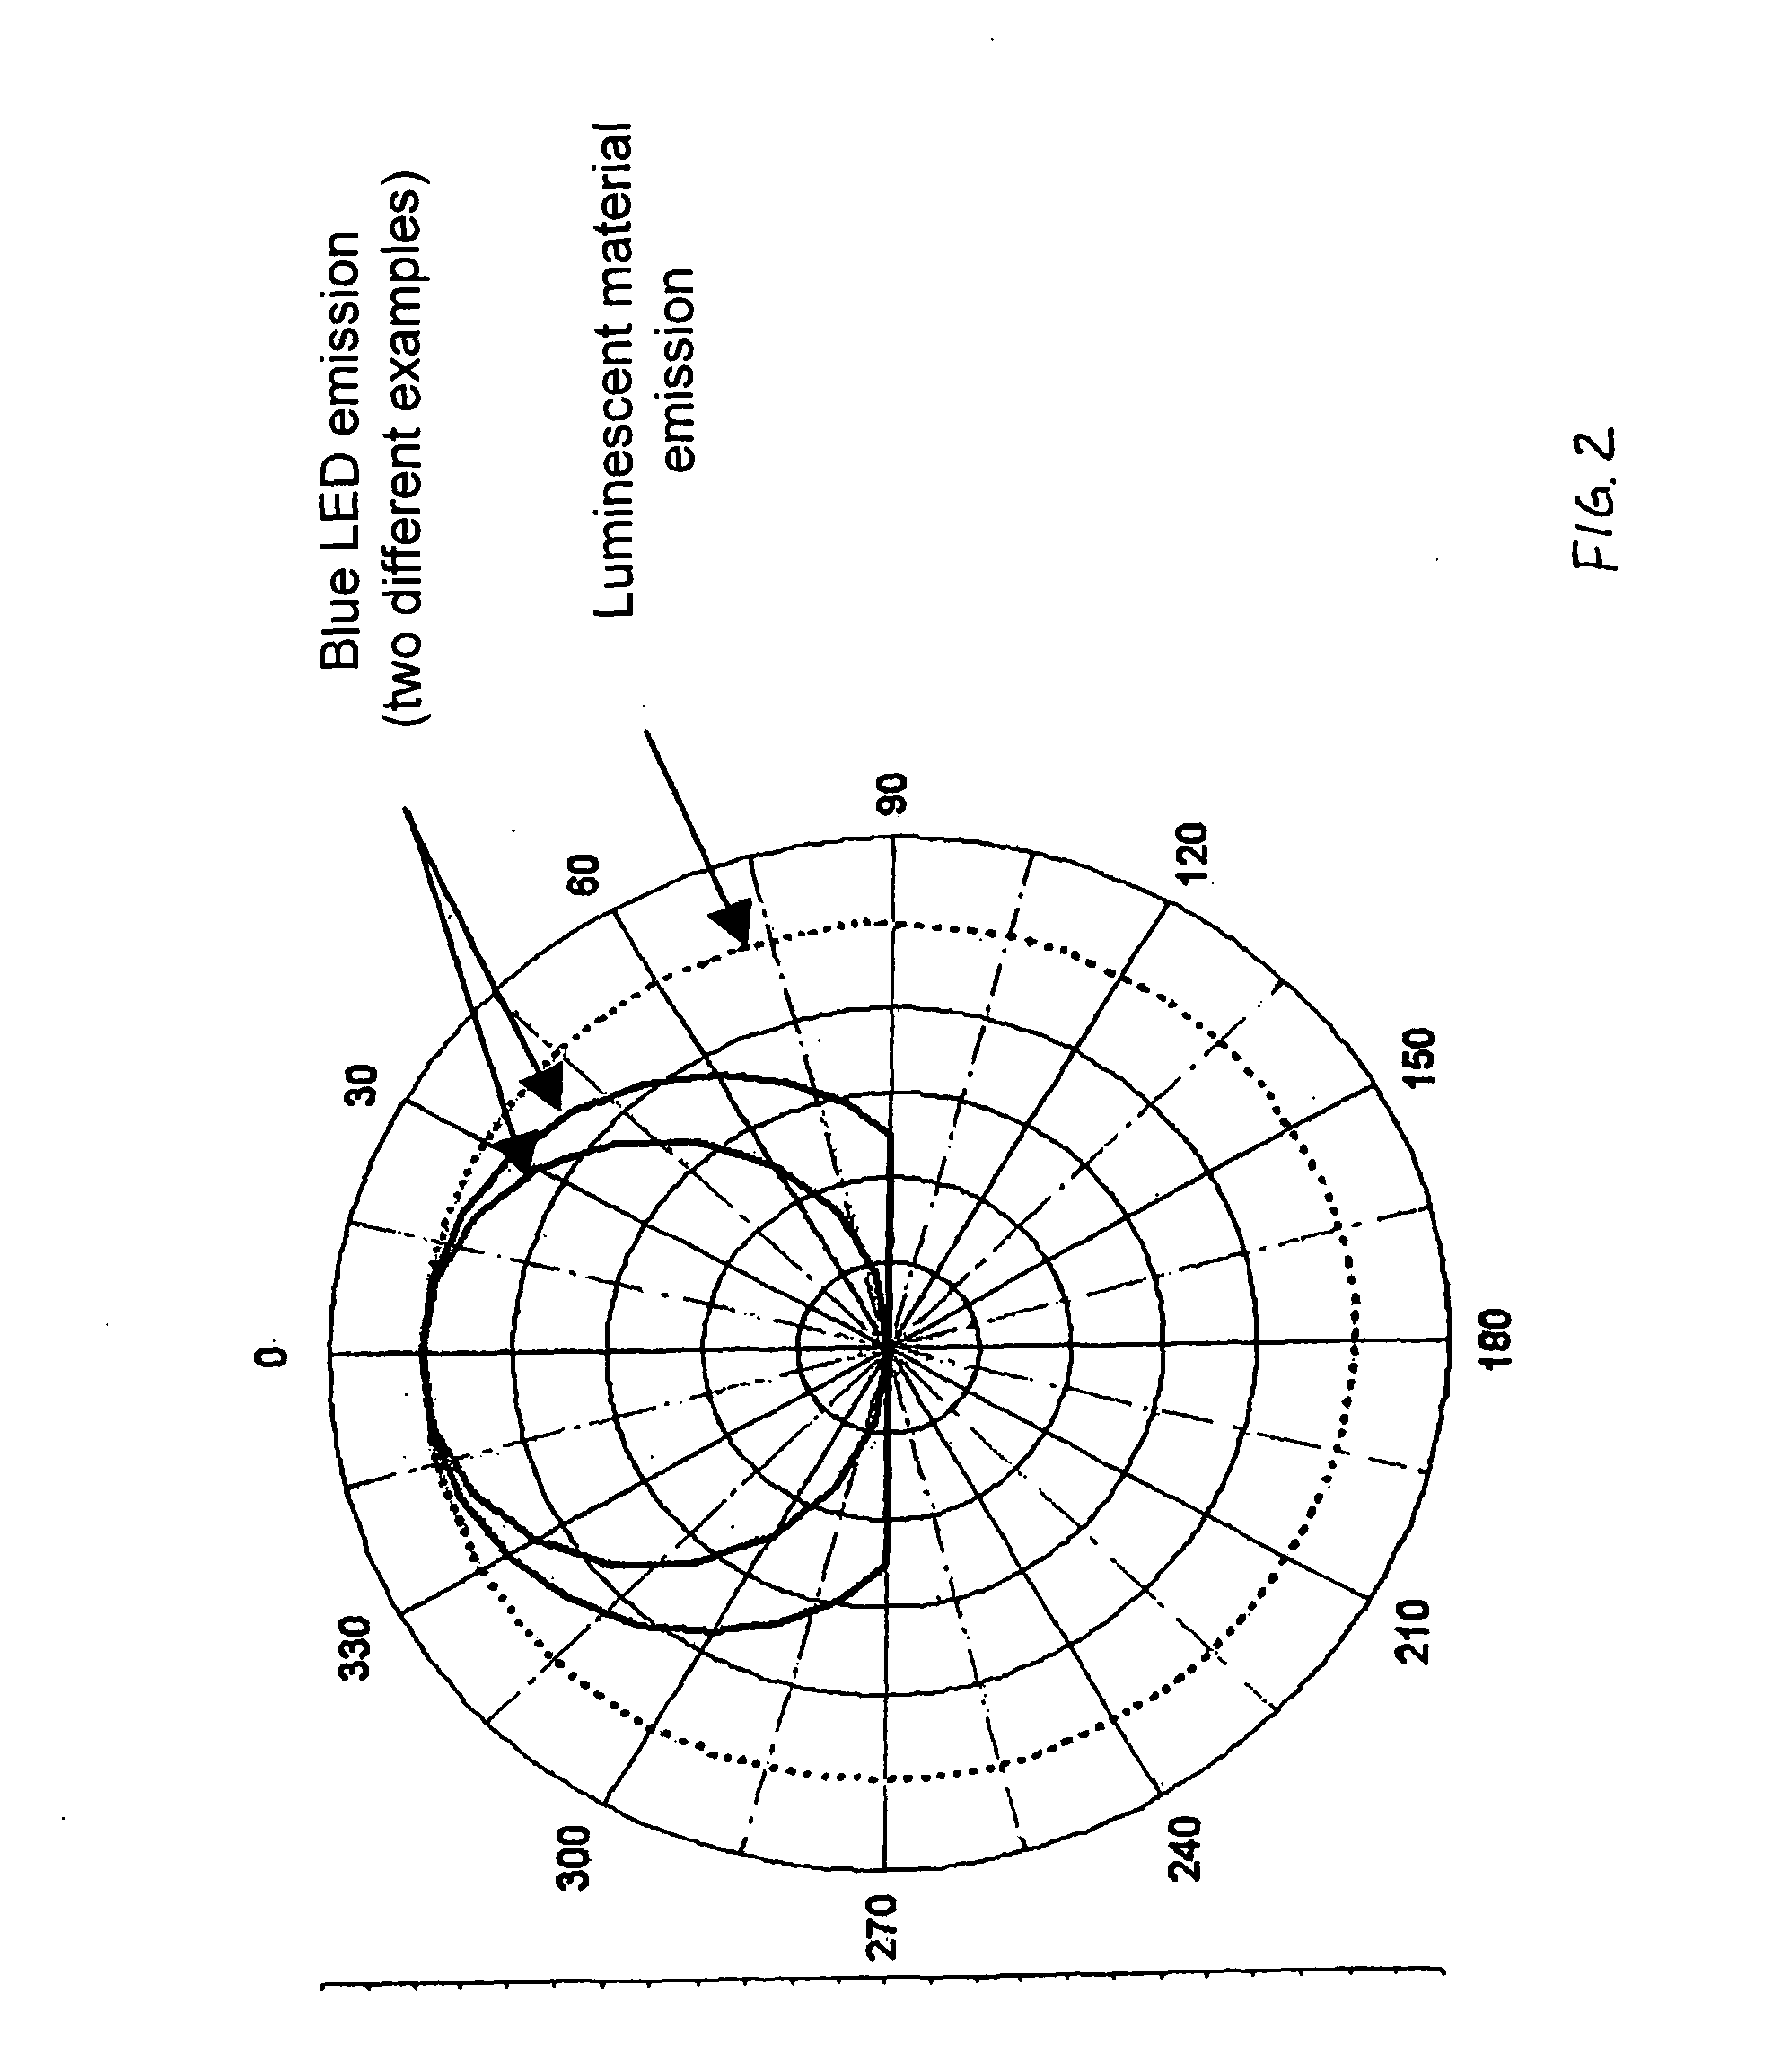 Light emitting device with a non-activated luminescent material